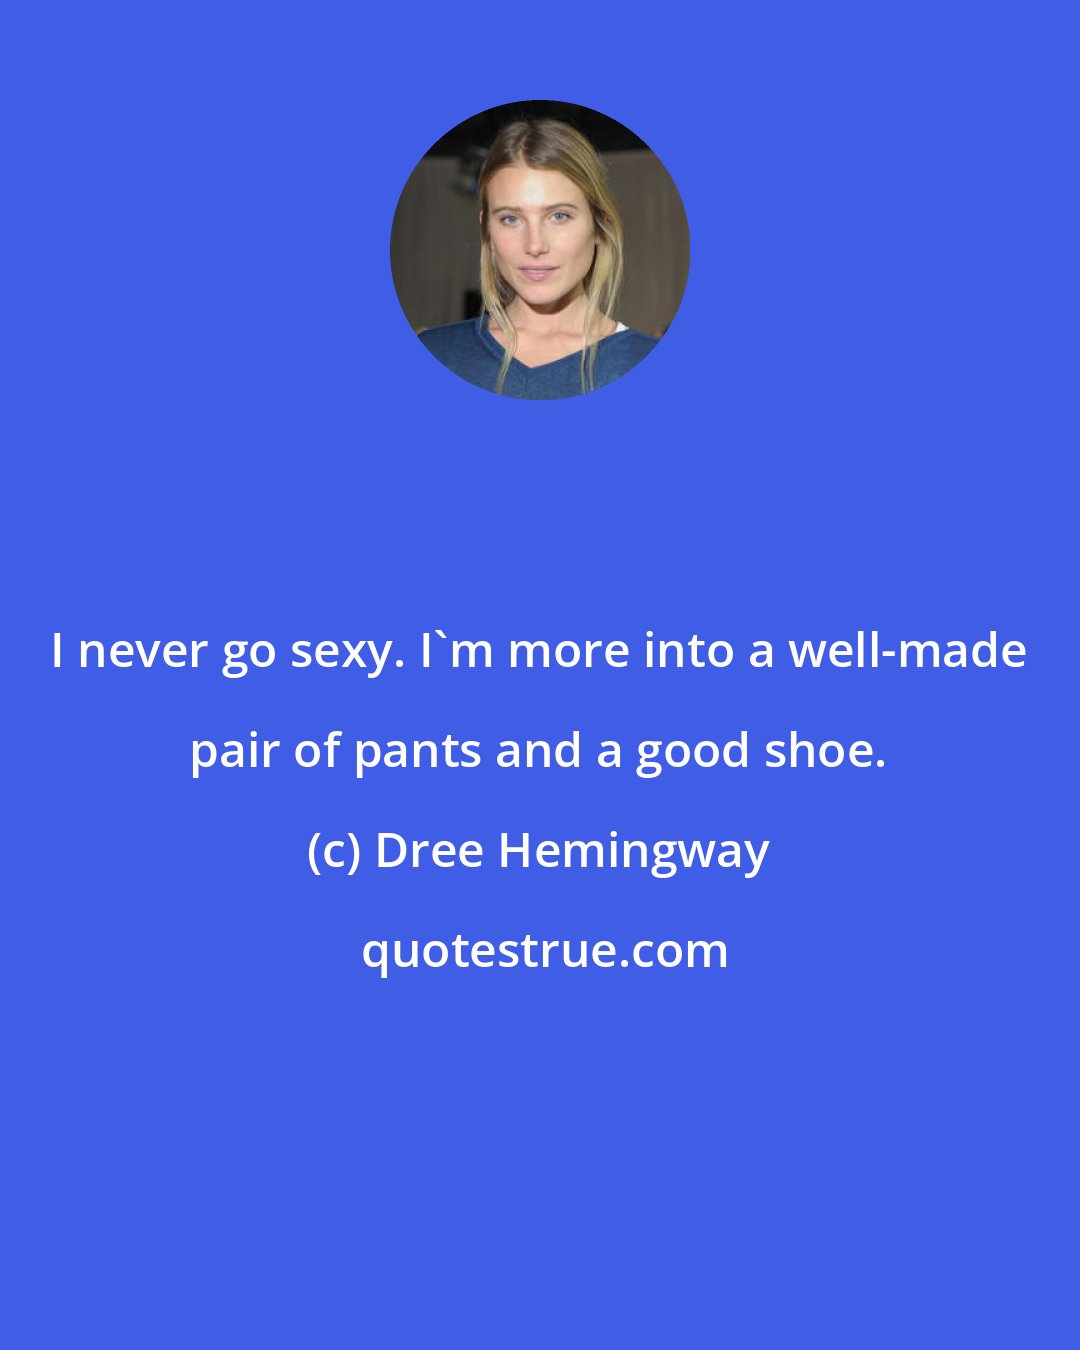 Dree Hemingway: I never go sexy. I'm more into a well-made pair of pants and a good shoe.